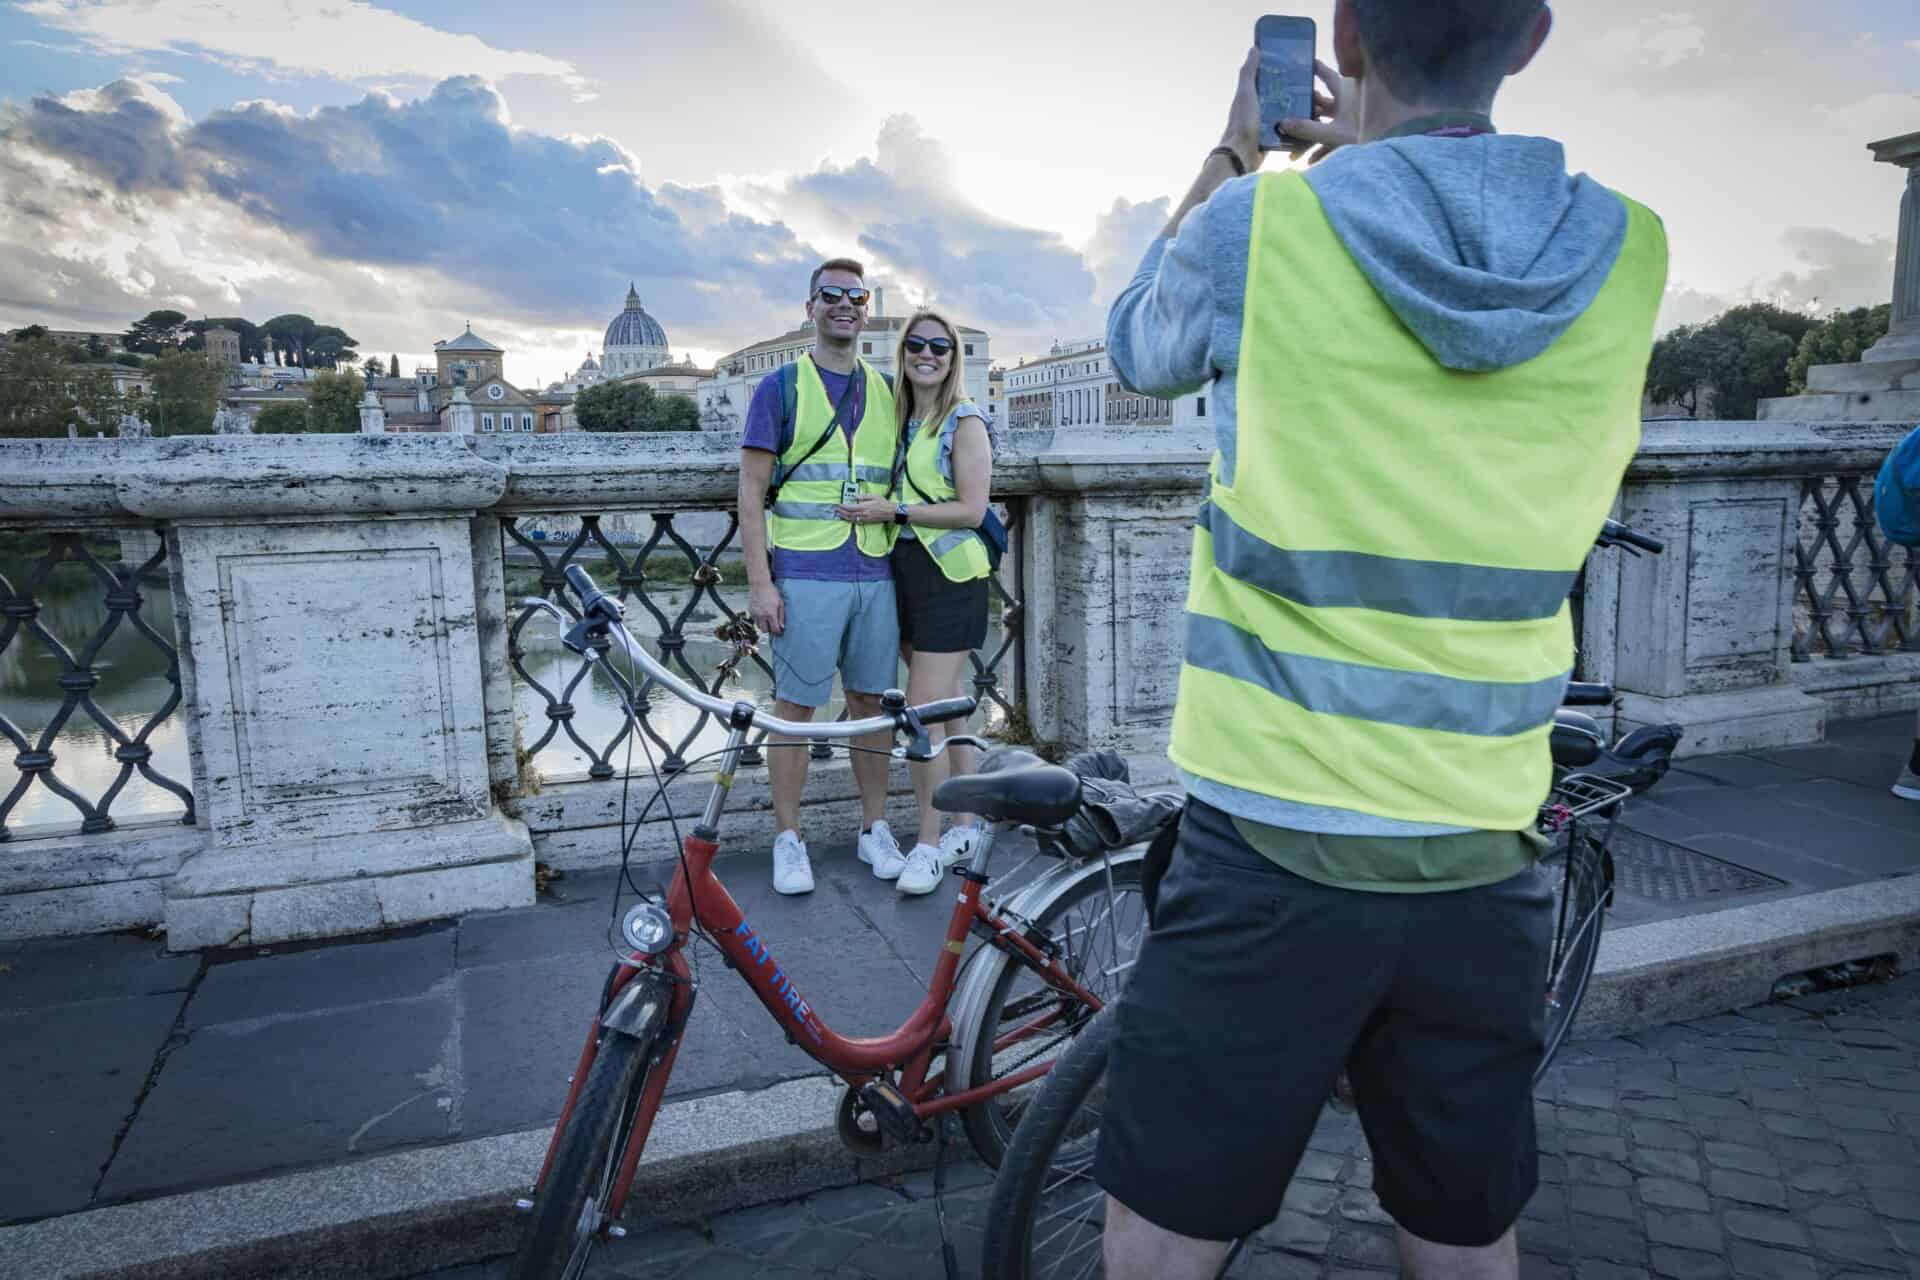 A couple poses for a photo on a bridge in Rome with St. Peter's Basilica in the background